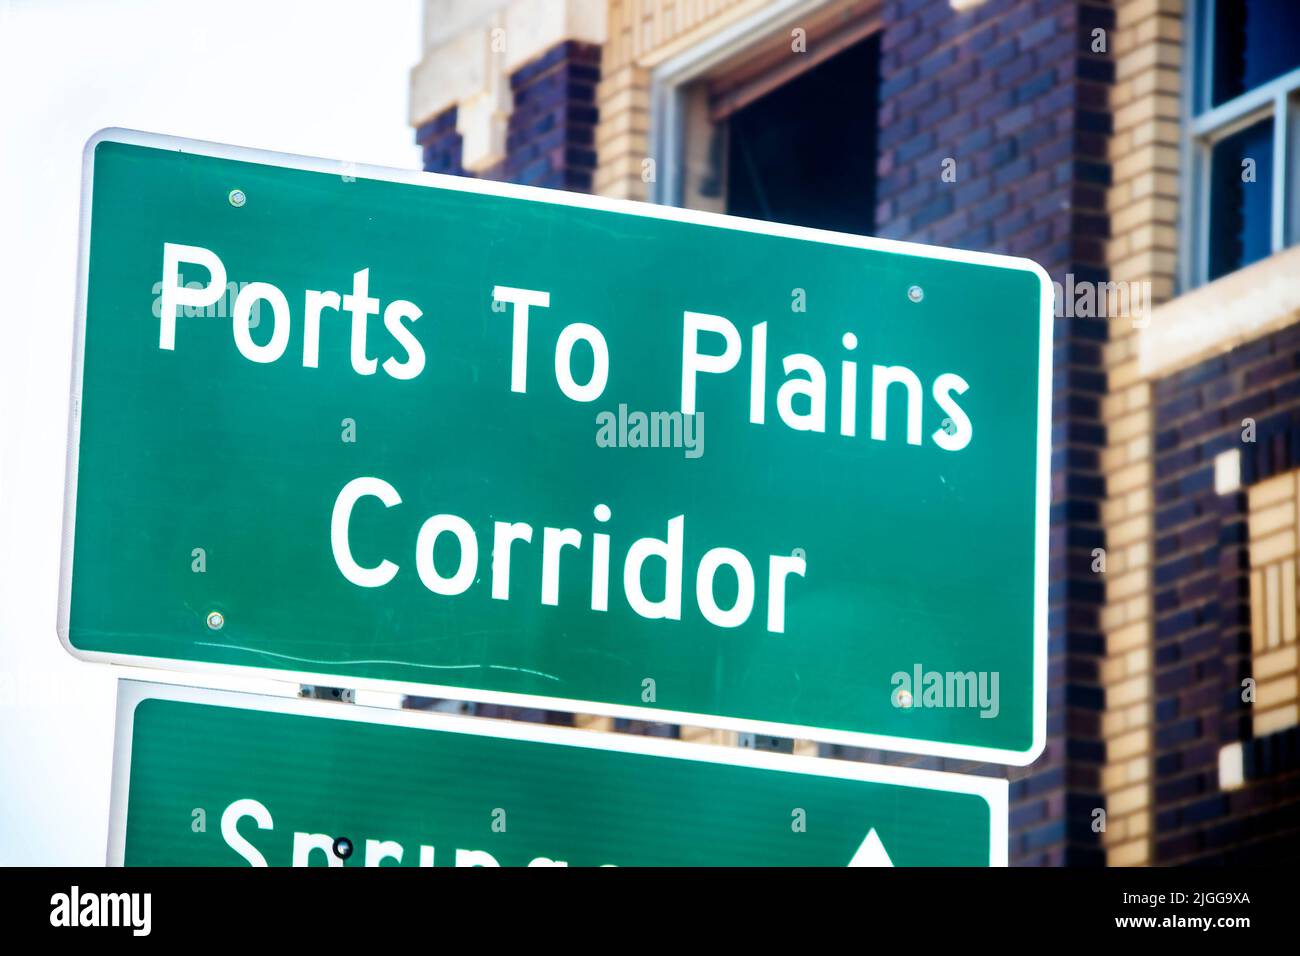 Closeup of Ports to Plains Corridor sign with blurred brick buildings in the background Stock Photo